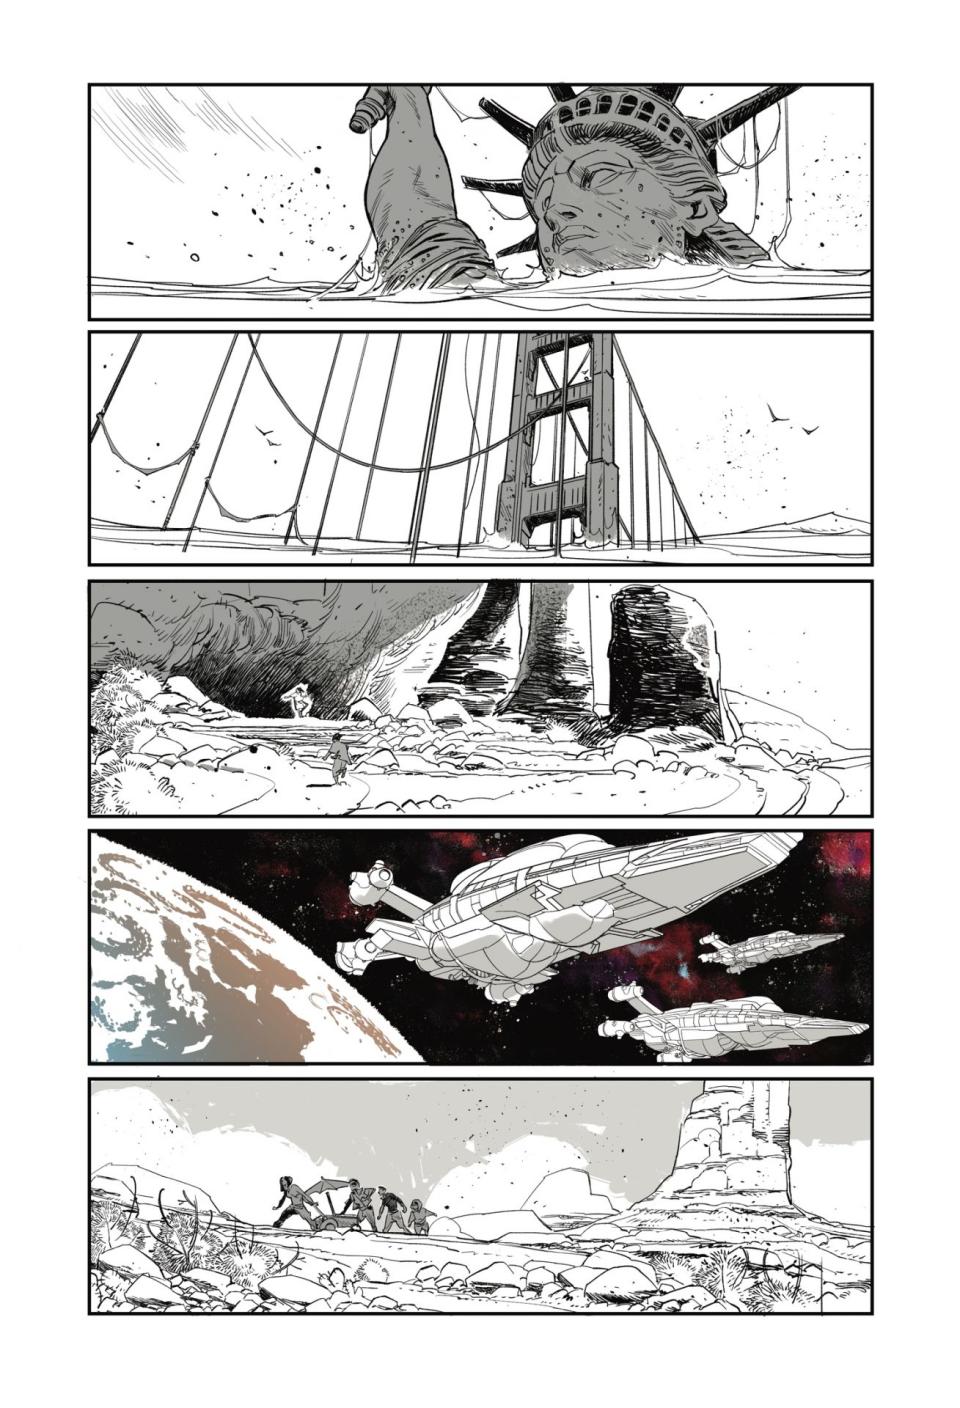 A page from Earthdivers #1 shows a ship on the sea and ship in space